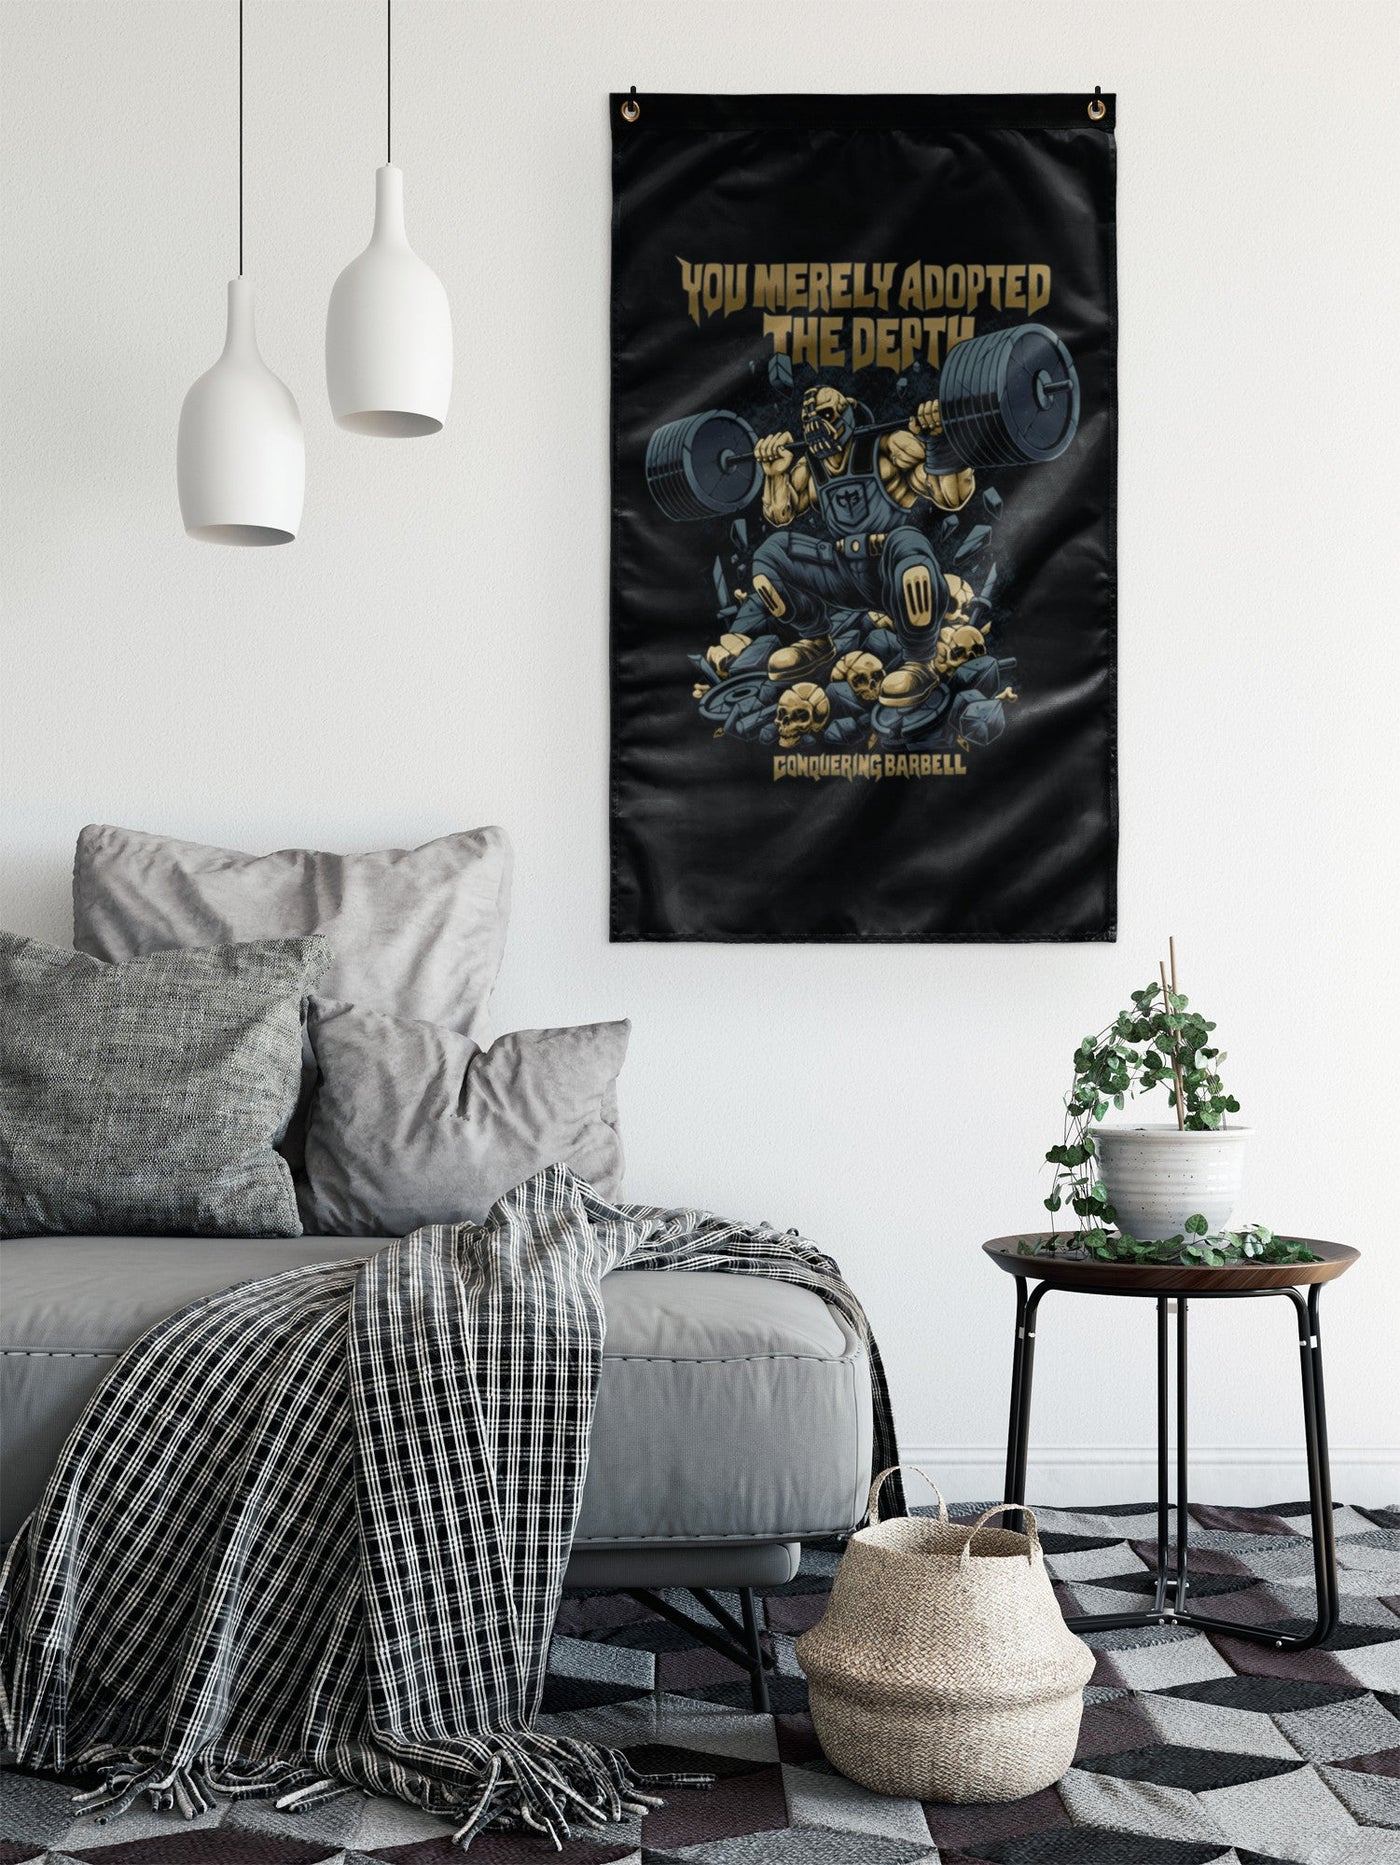 YOU MERELY ADOPTED THE DEPTH -36"x60" Flag - TL - Conquering Barbell